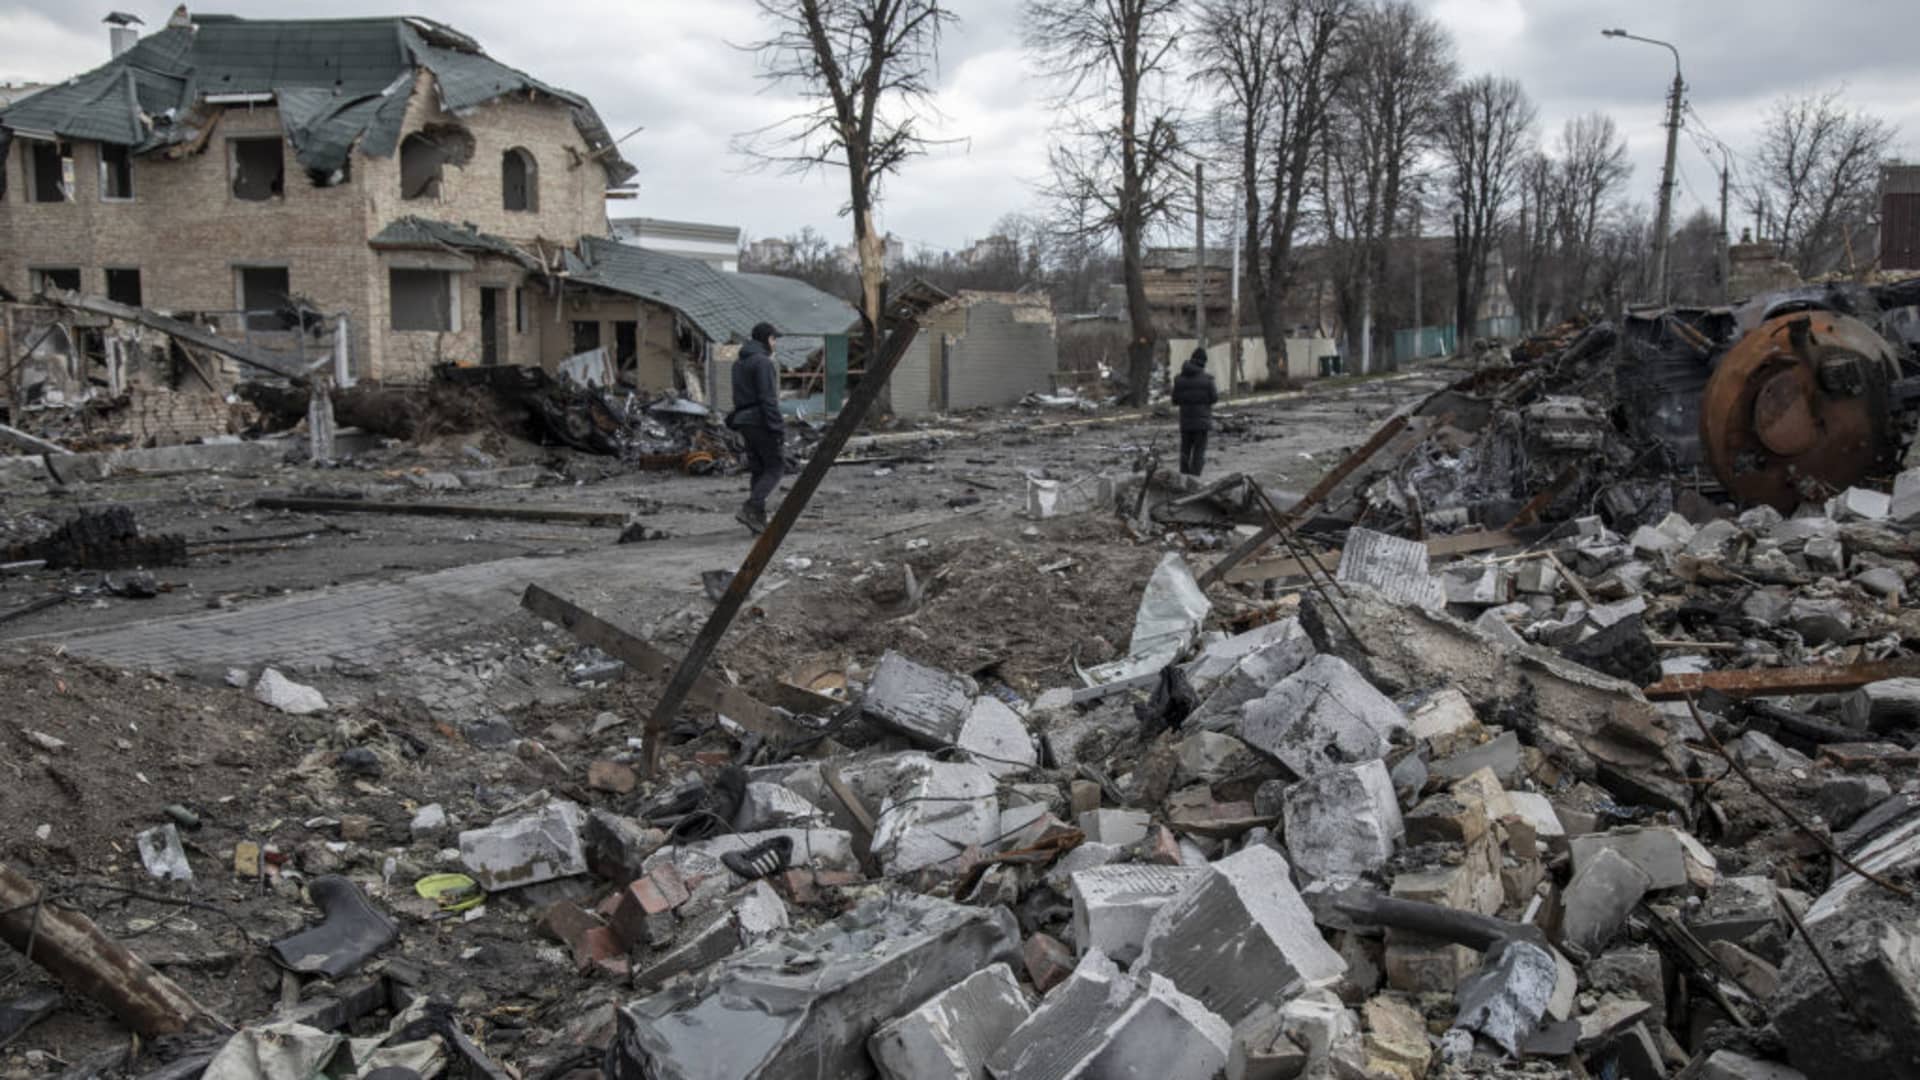 Civilians walk amid the destruction on a street in the town of Bucha, on the outskirts of Kyiv, after the Ukrainian army secured the area following the withdrawal of the Russian army.